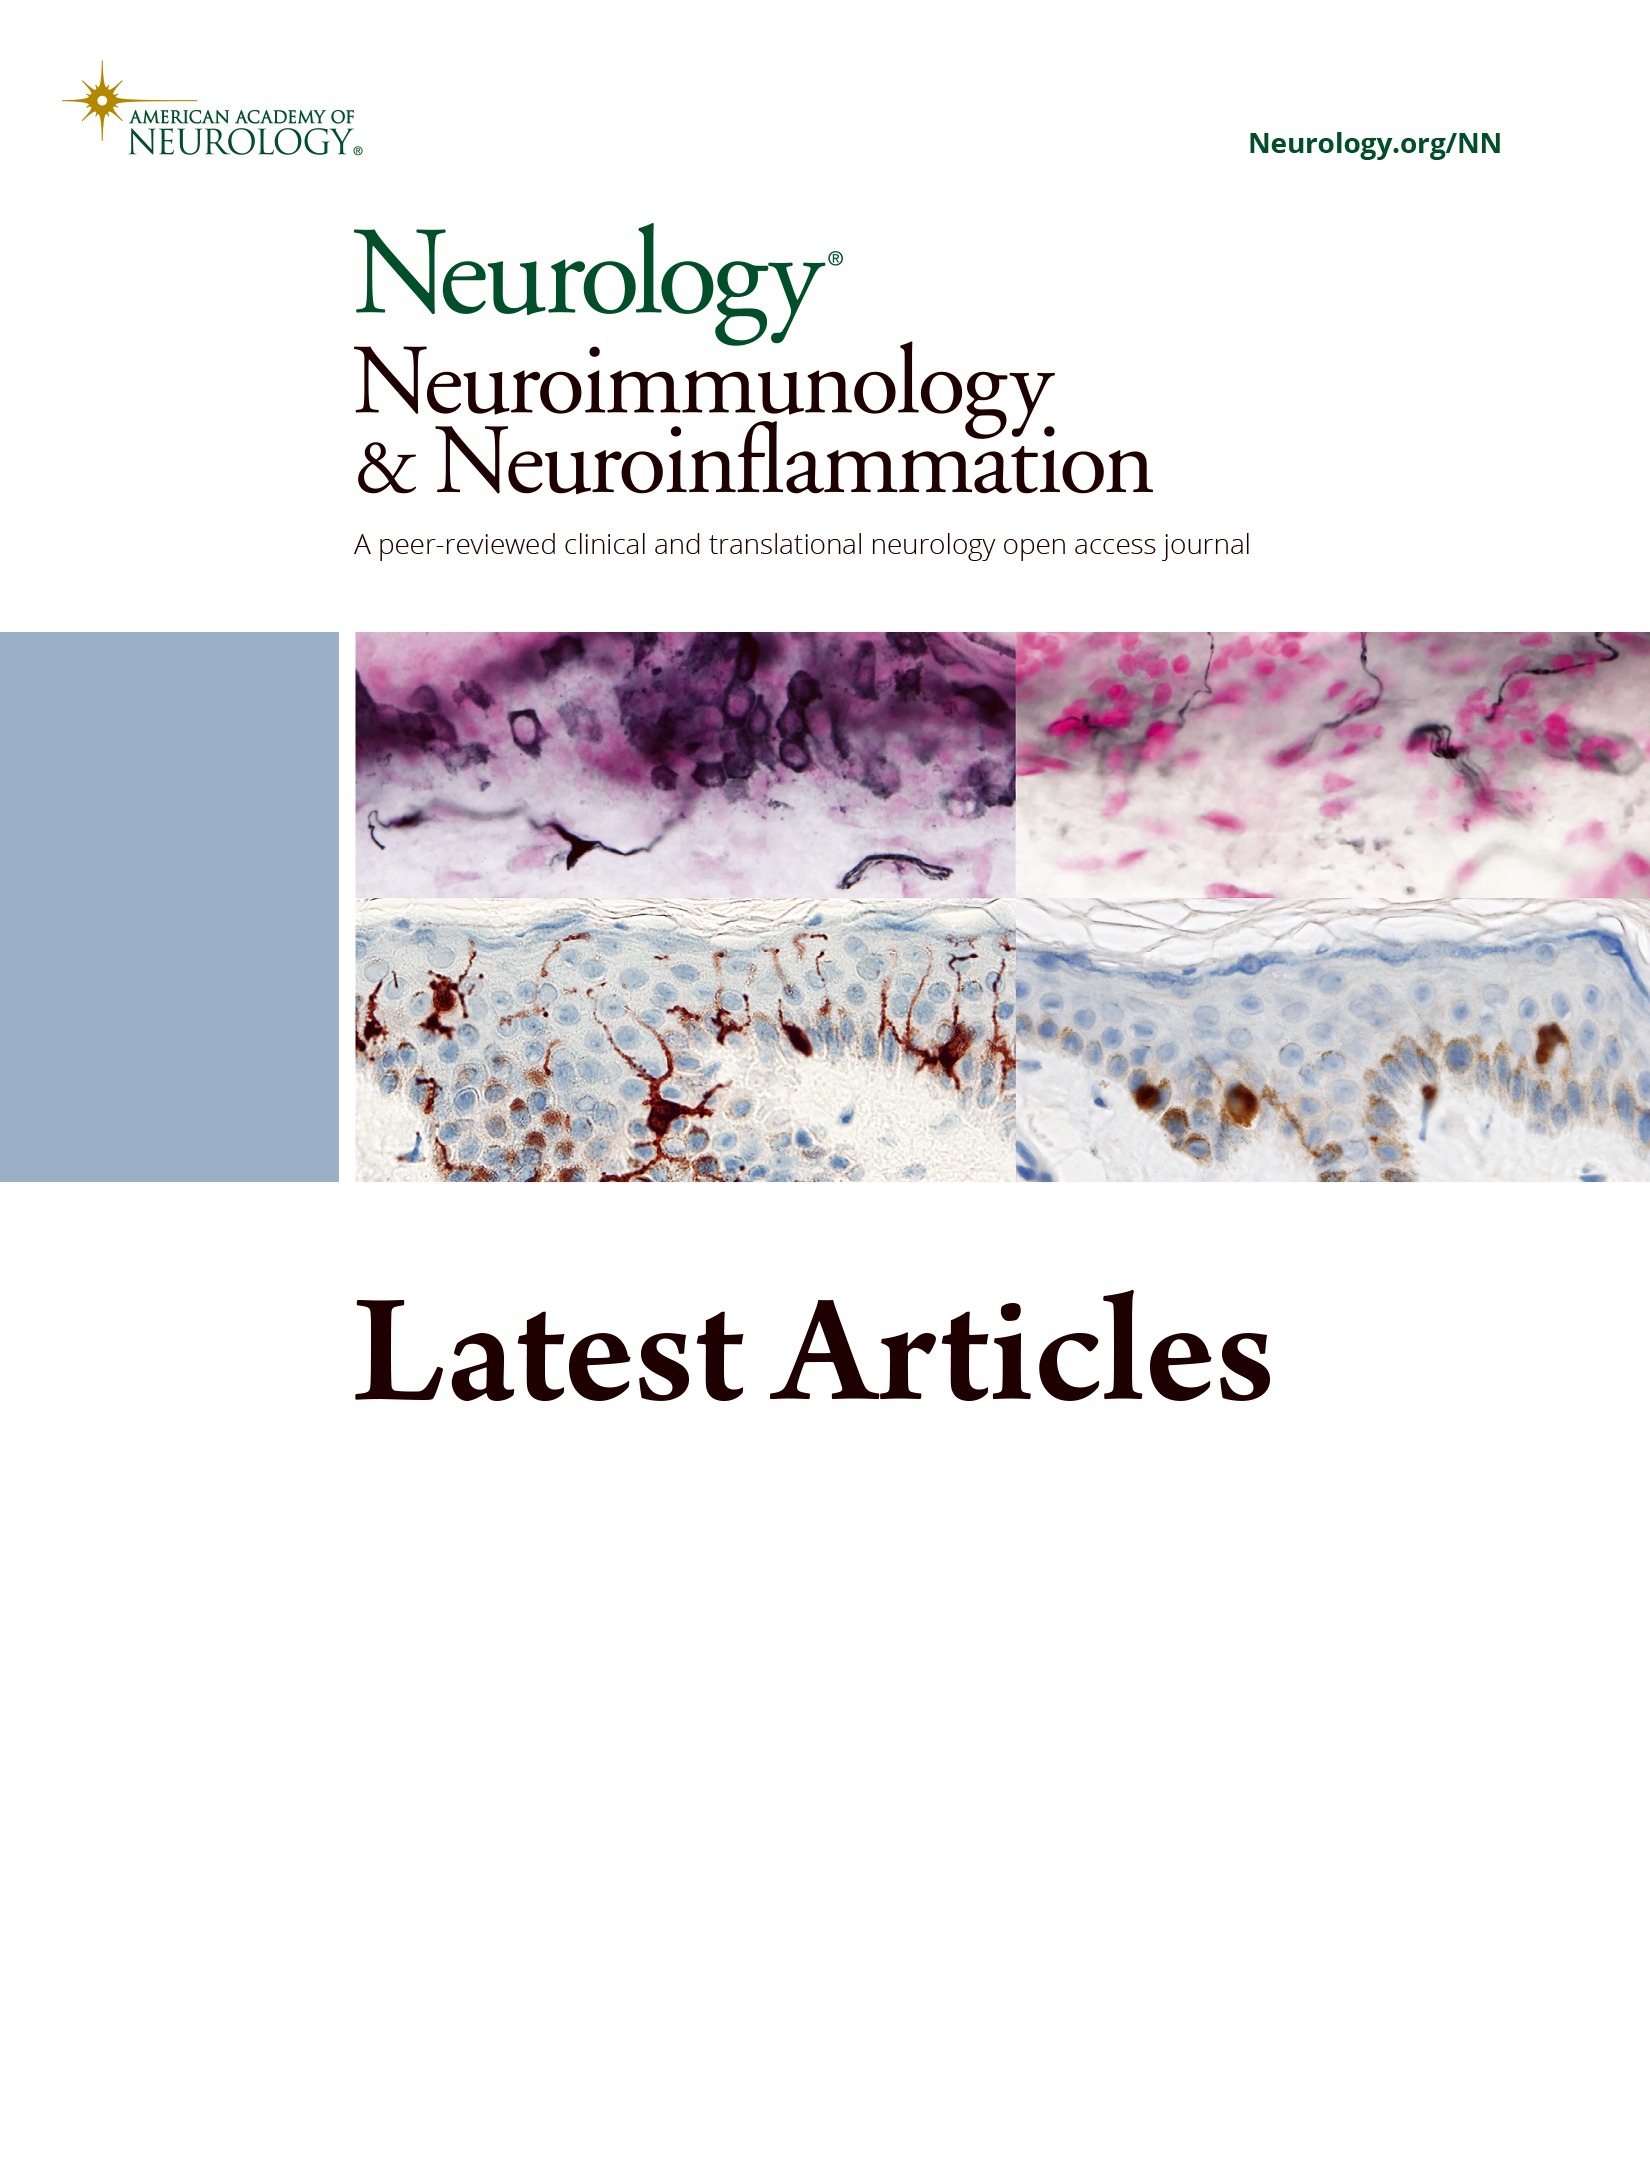 EBNA1 Inhibitors Block Proliferation of Spontaneous Lymphoblastoid Cell Lines From Patients With Multiple Sclerosis and Healthy Controls